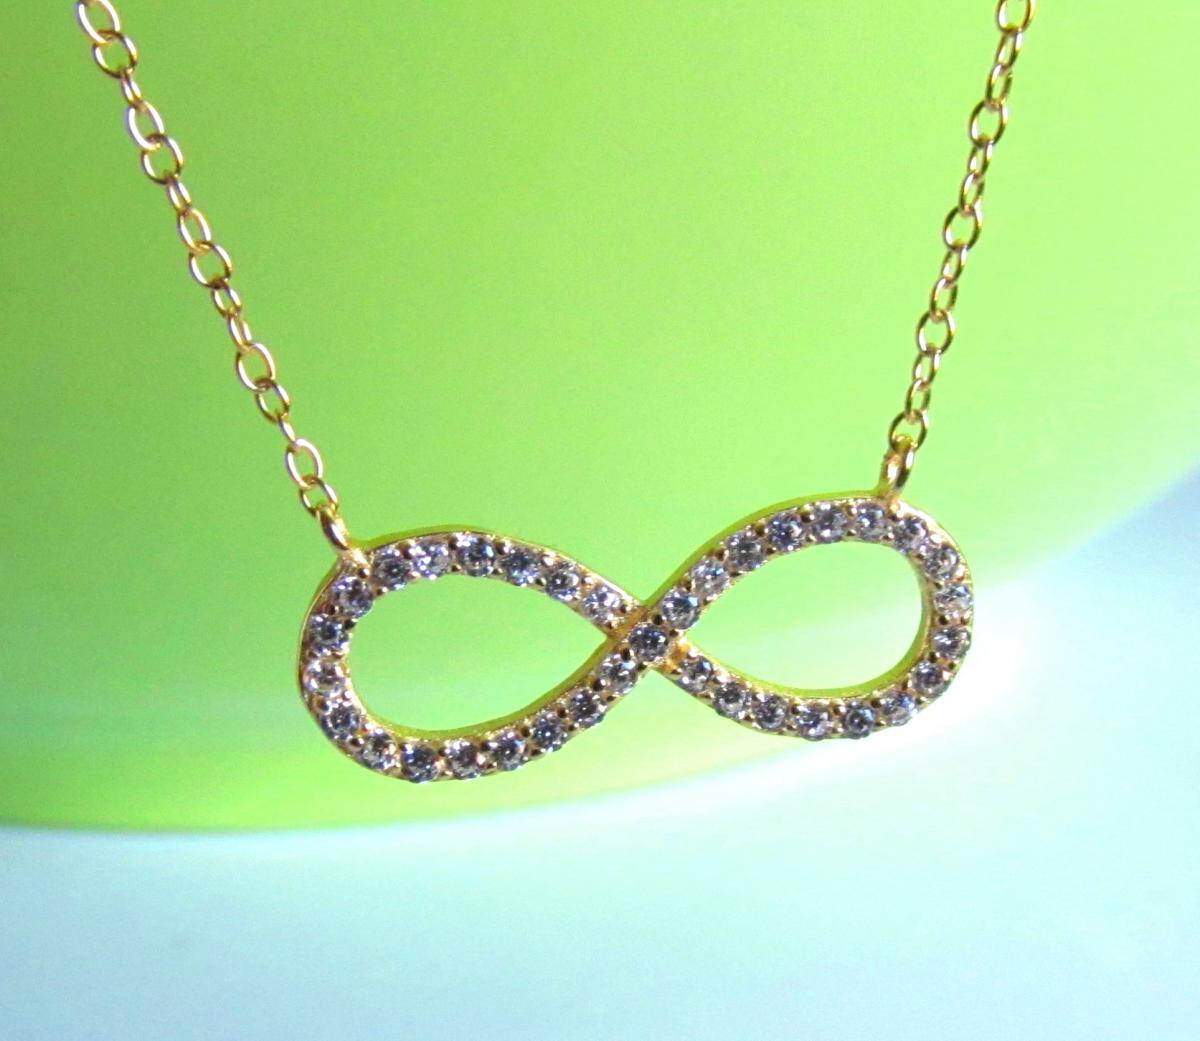 Cz Infinity Necklace-14 Kt Gold Over 925 Sterling Silver Necklace With Cz On 16+2 Cable Chain